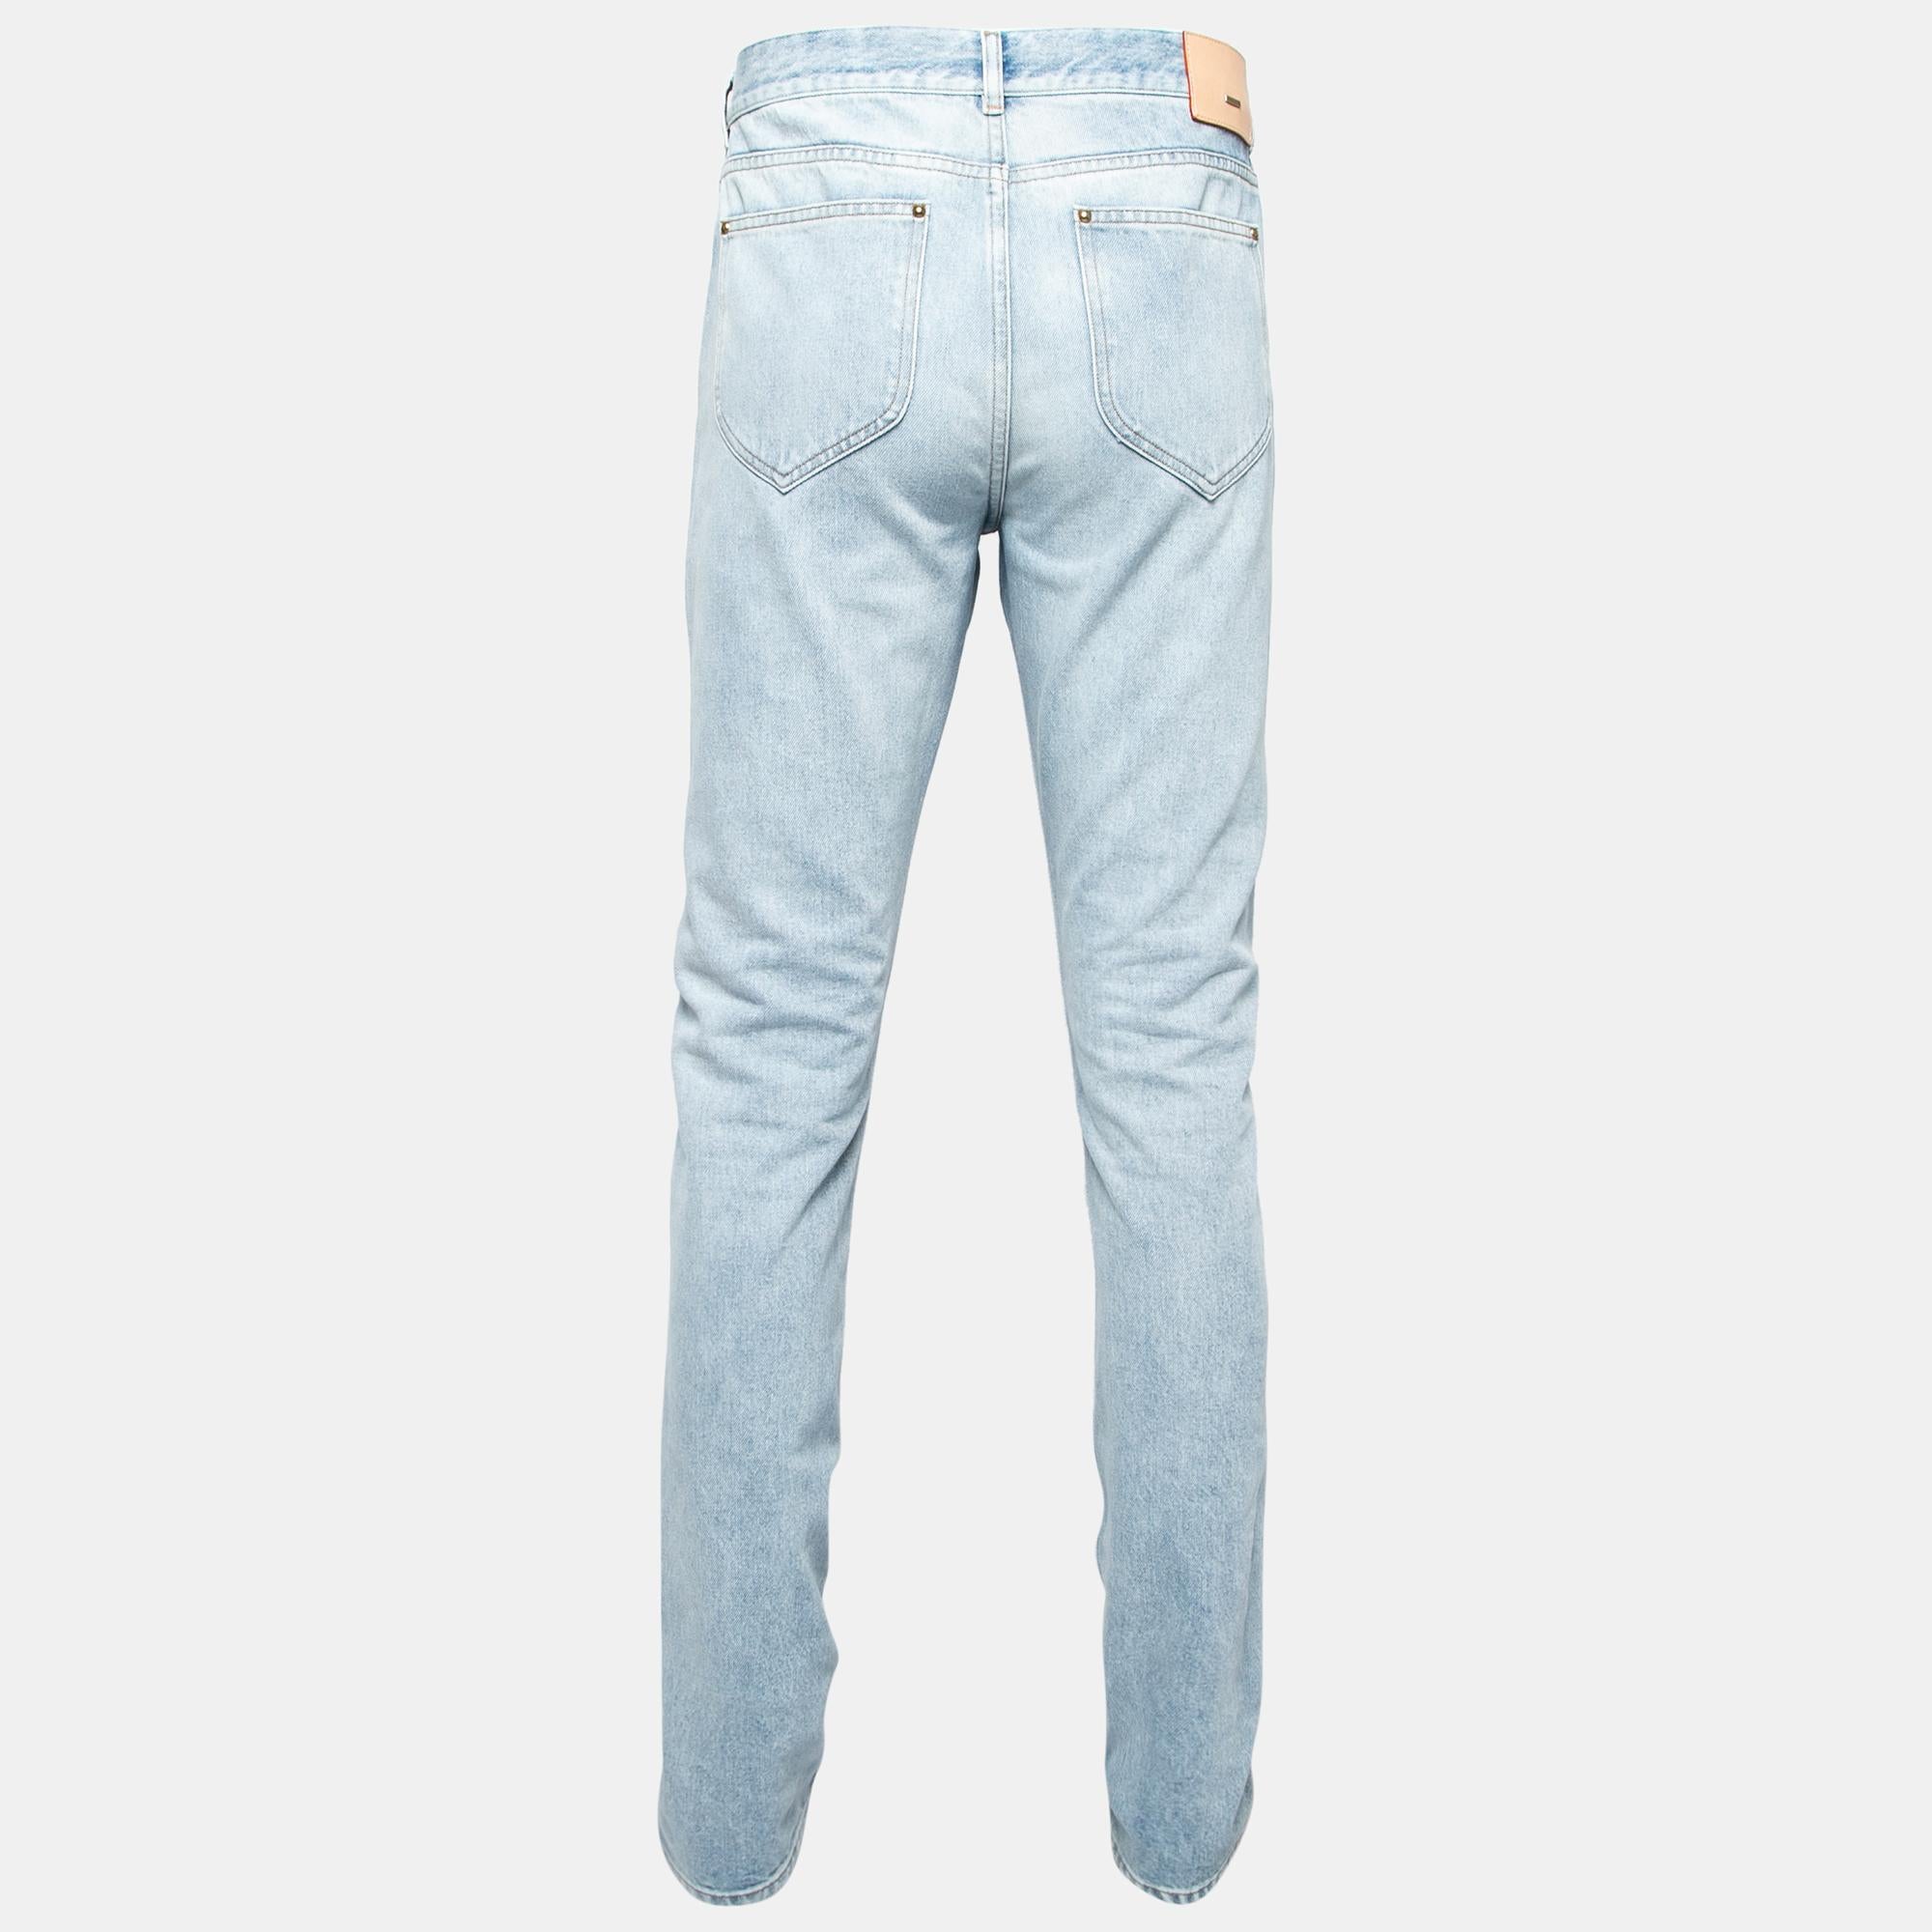 These jeans from the House of Louis Vuitton are definitely a closet essential. They are tailored using light-blue denim fabric and feature five pockets. These jeans have been provided with a buttoned closure. Flaunt a comfy and casual look with